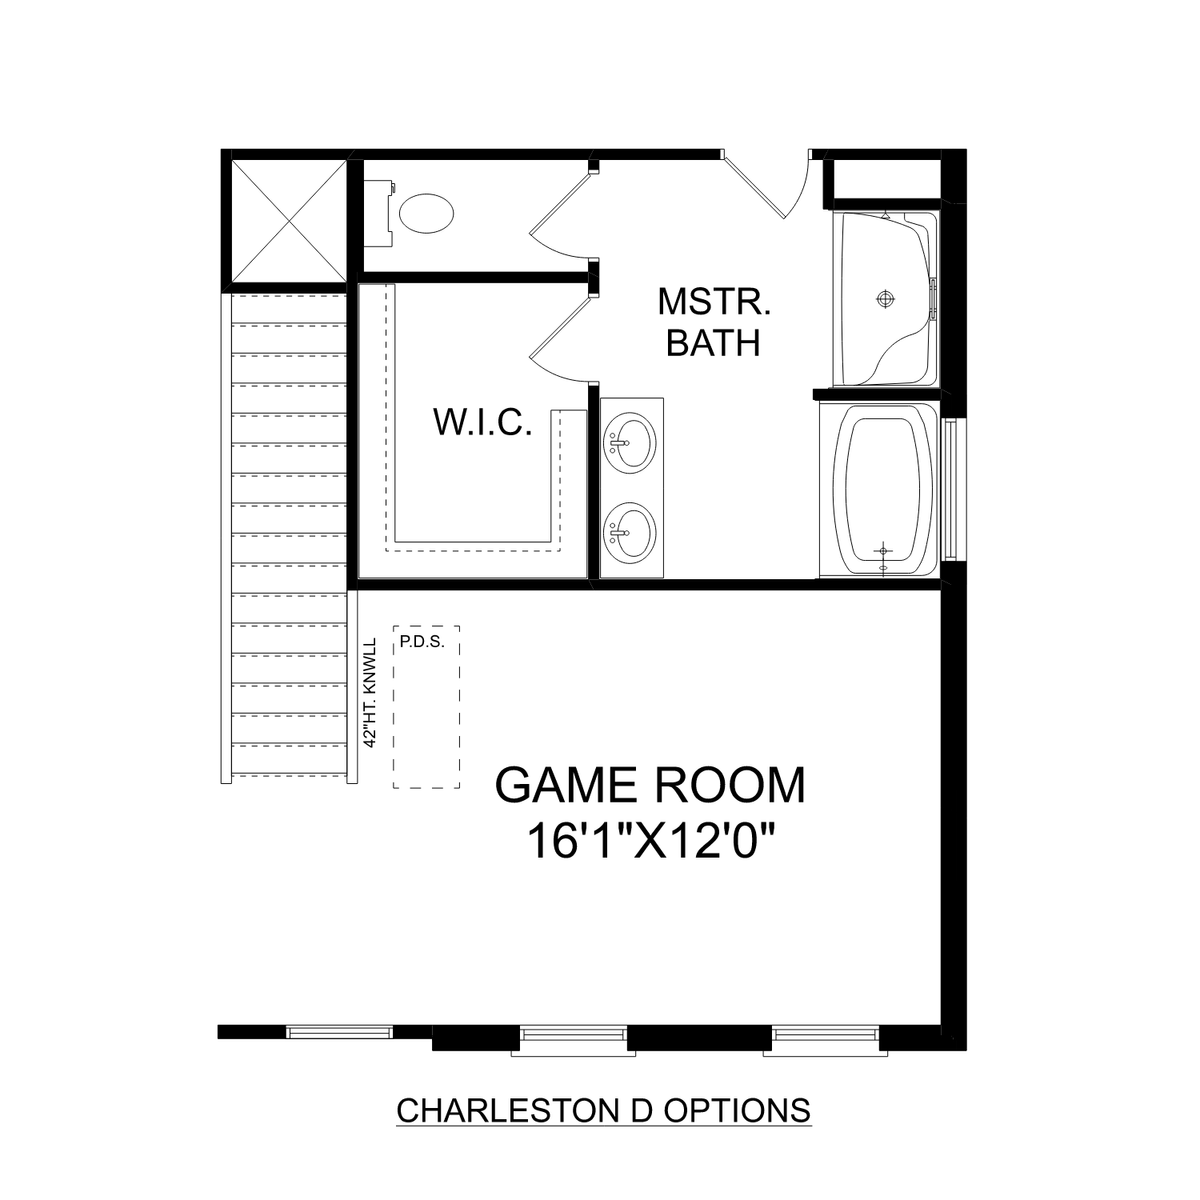 3 - The Charleston D buildable floor plan layout in Davidson Homes' The Meadows community.